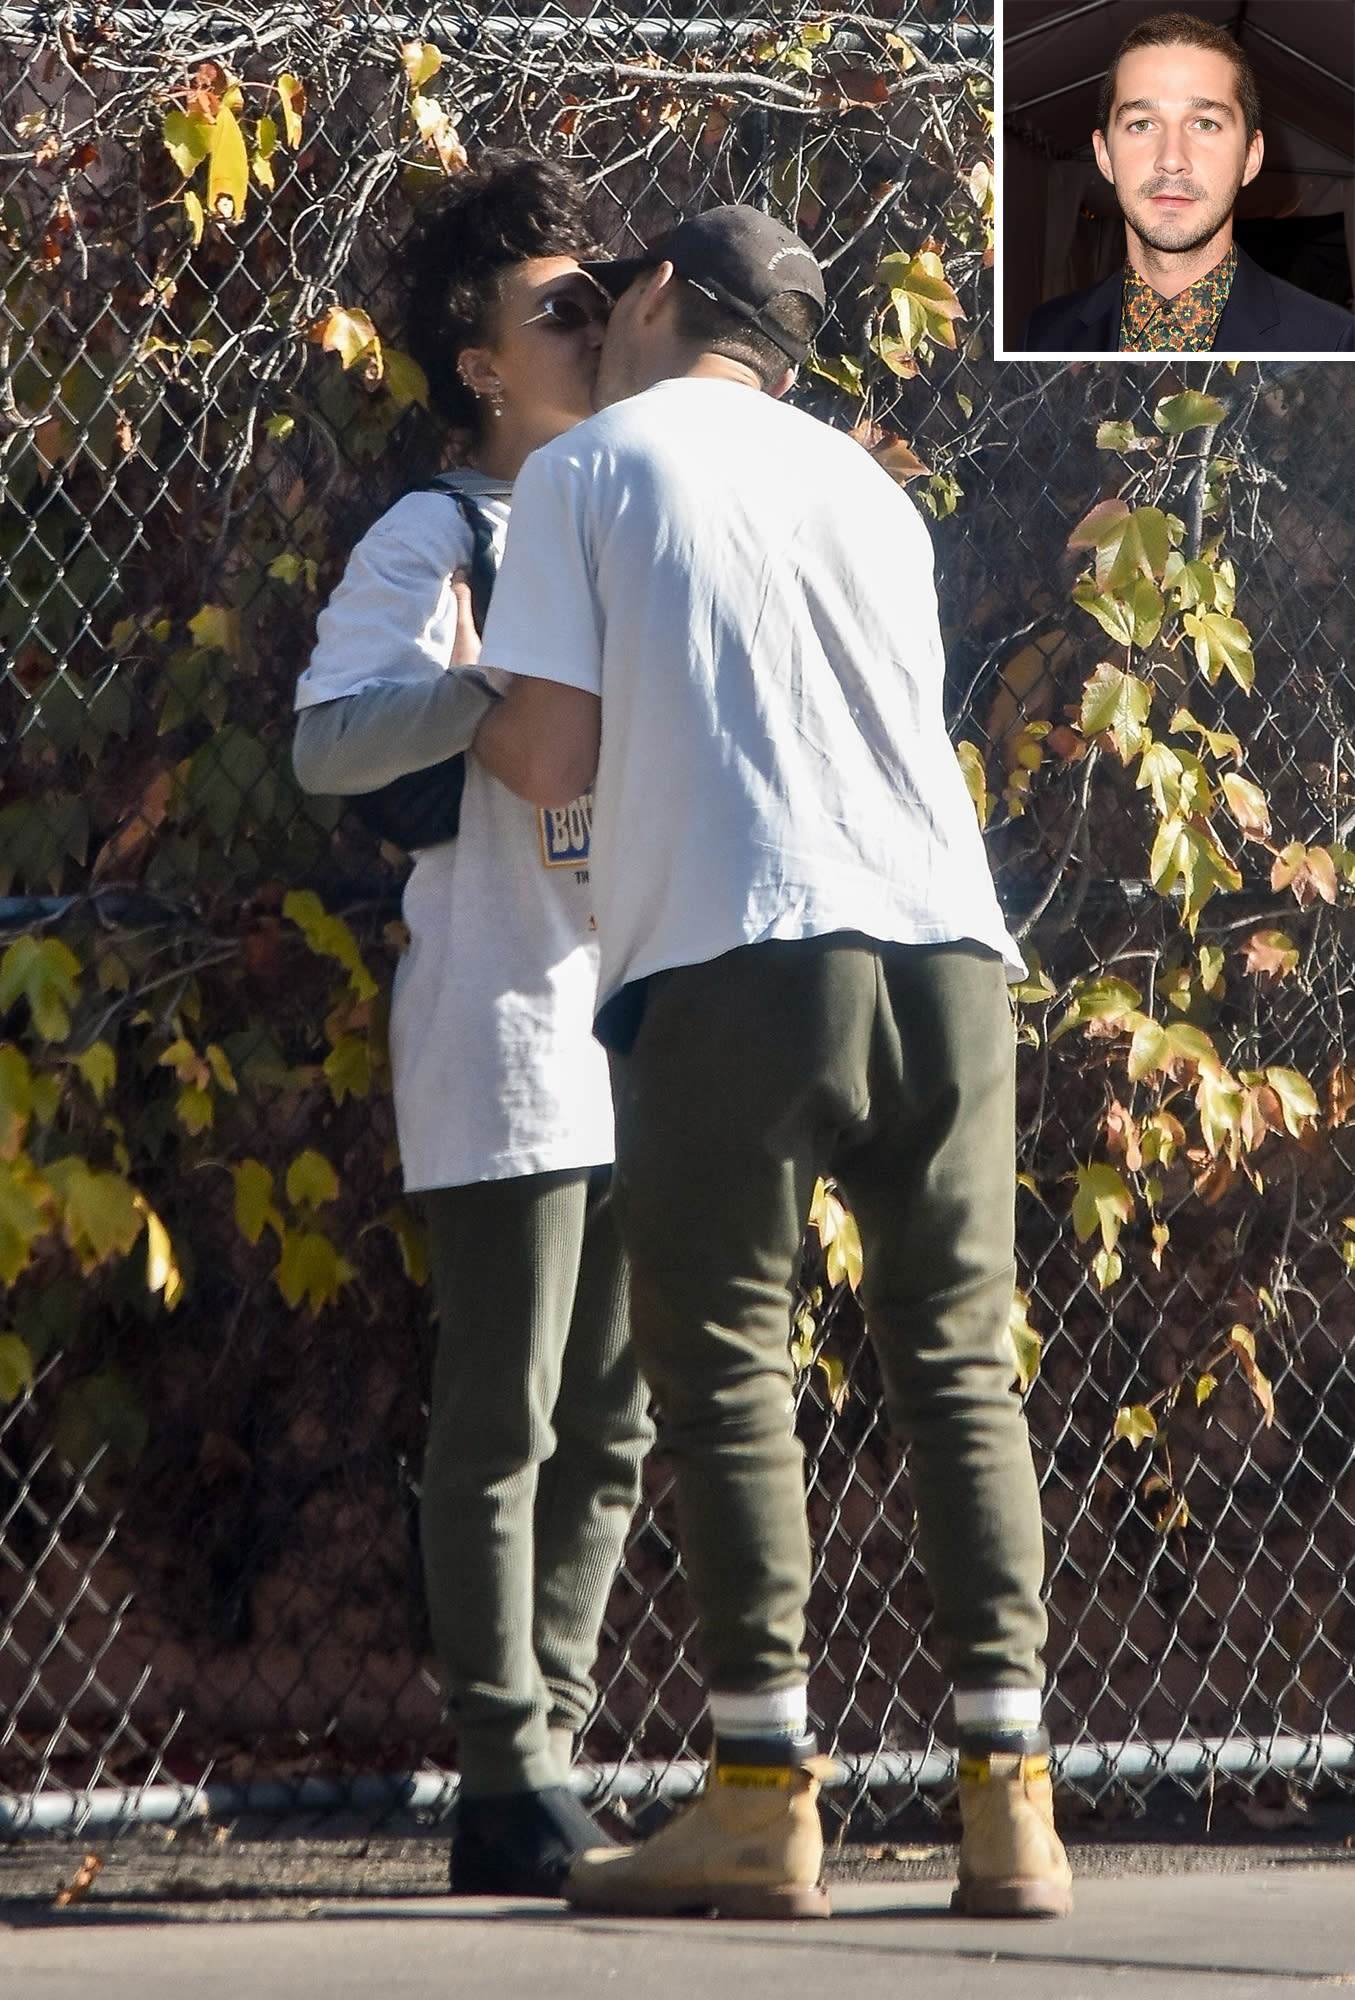 Shia LaBeouf Shares a Kiss with FKA Twigs in L.A. After Being Spotted Together in the U.K.1355 x 2000